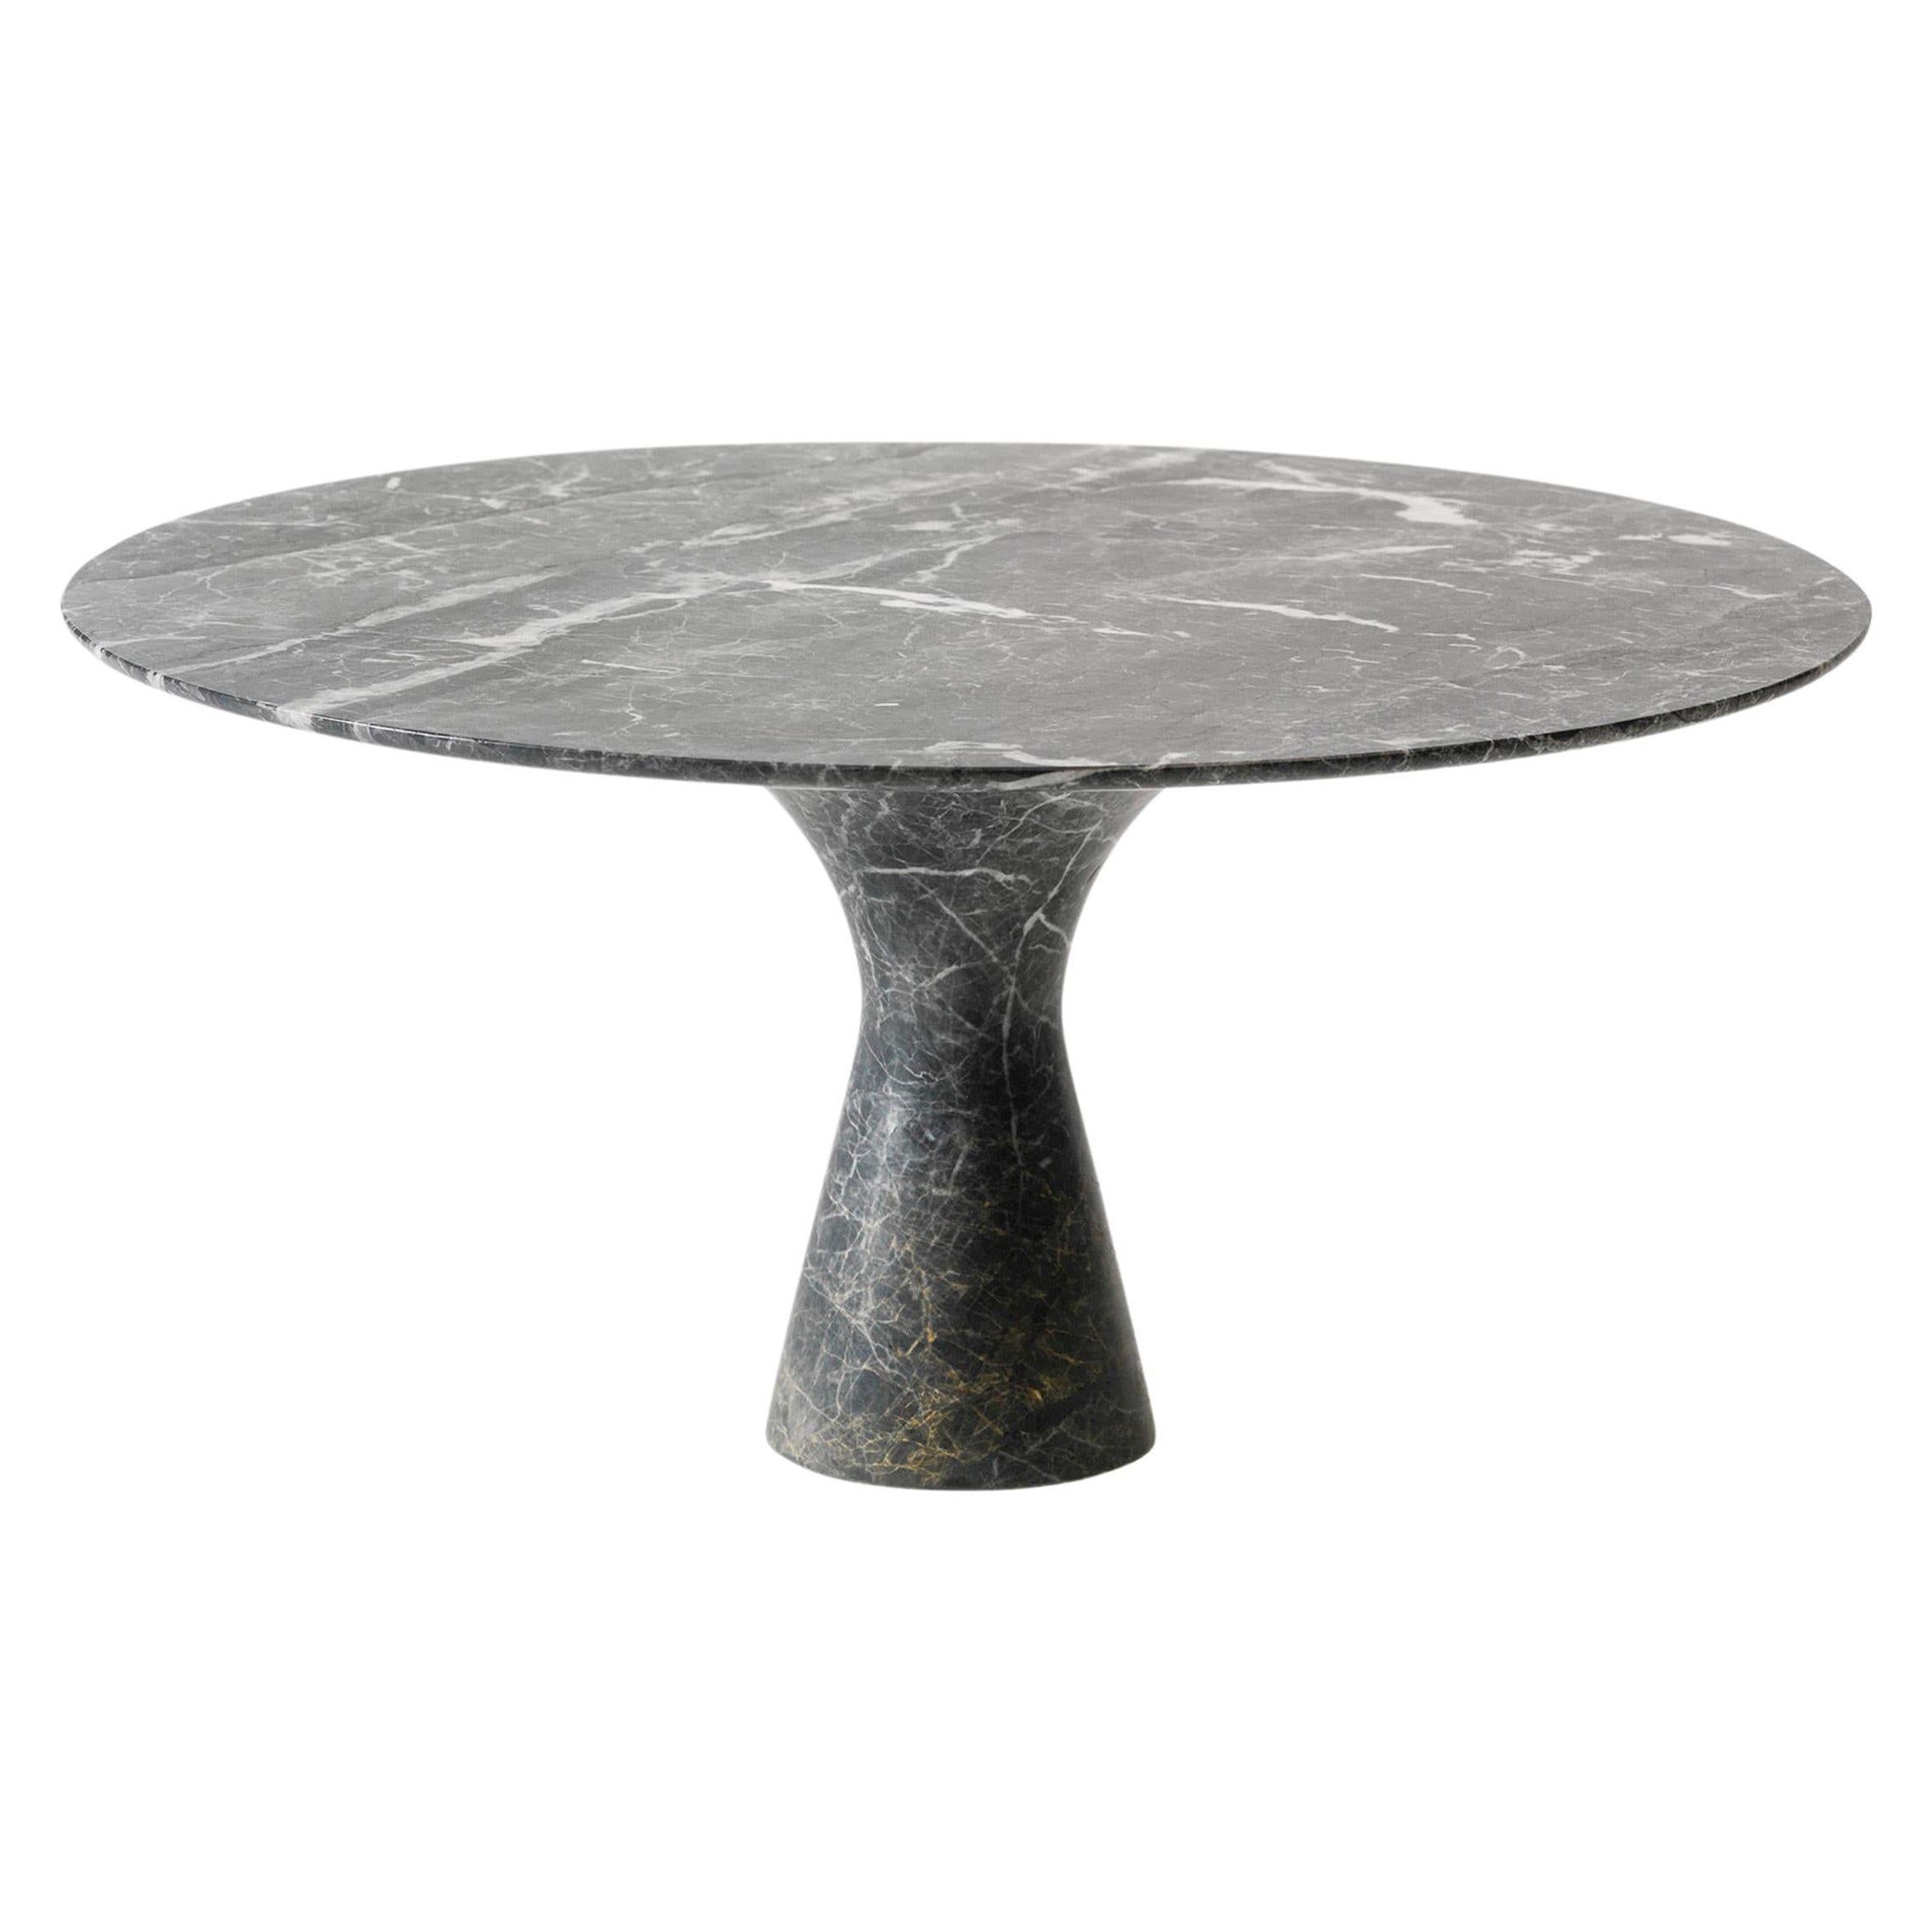 Grey Saint Laurent Refined Contemporary Marble Dining Table 160/75 For Sale